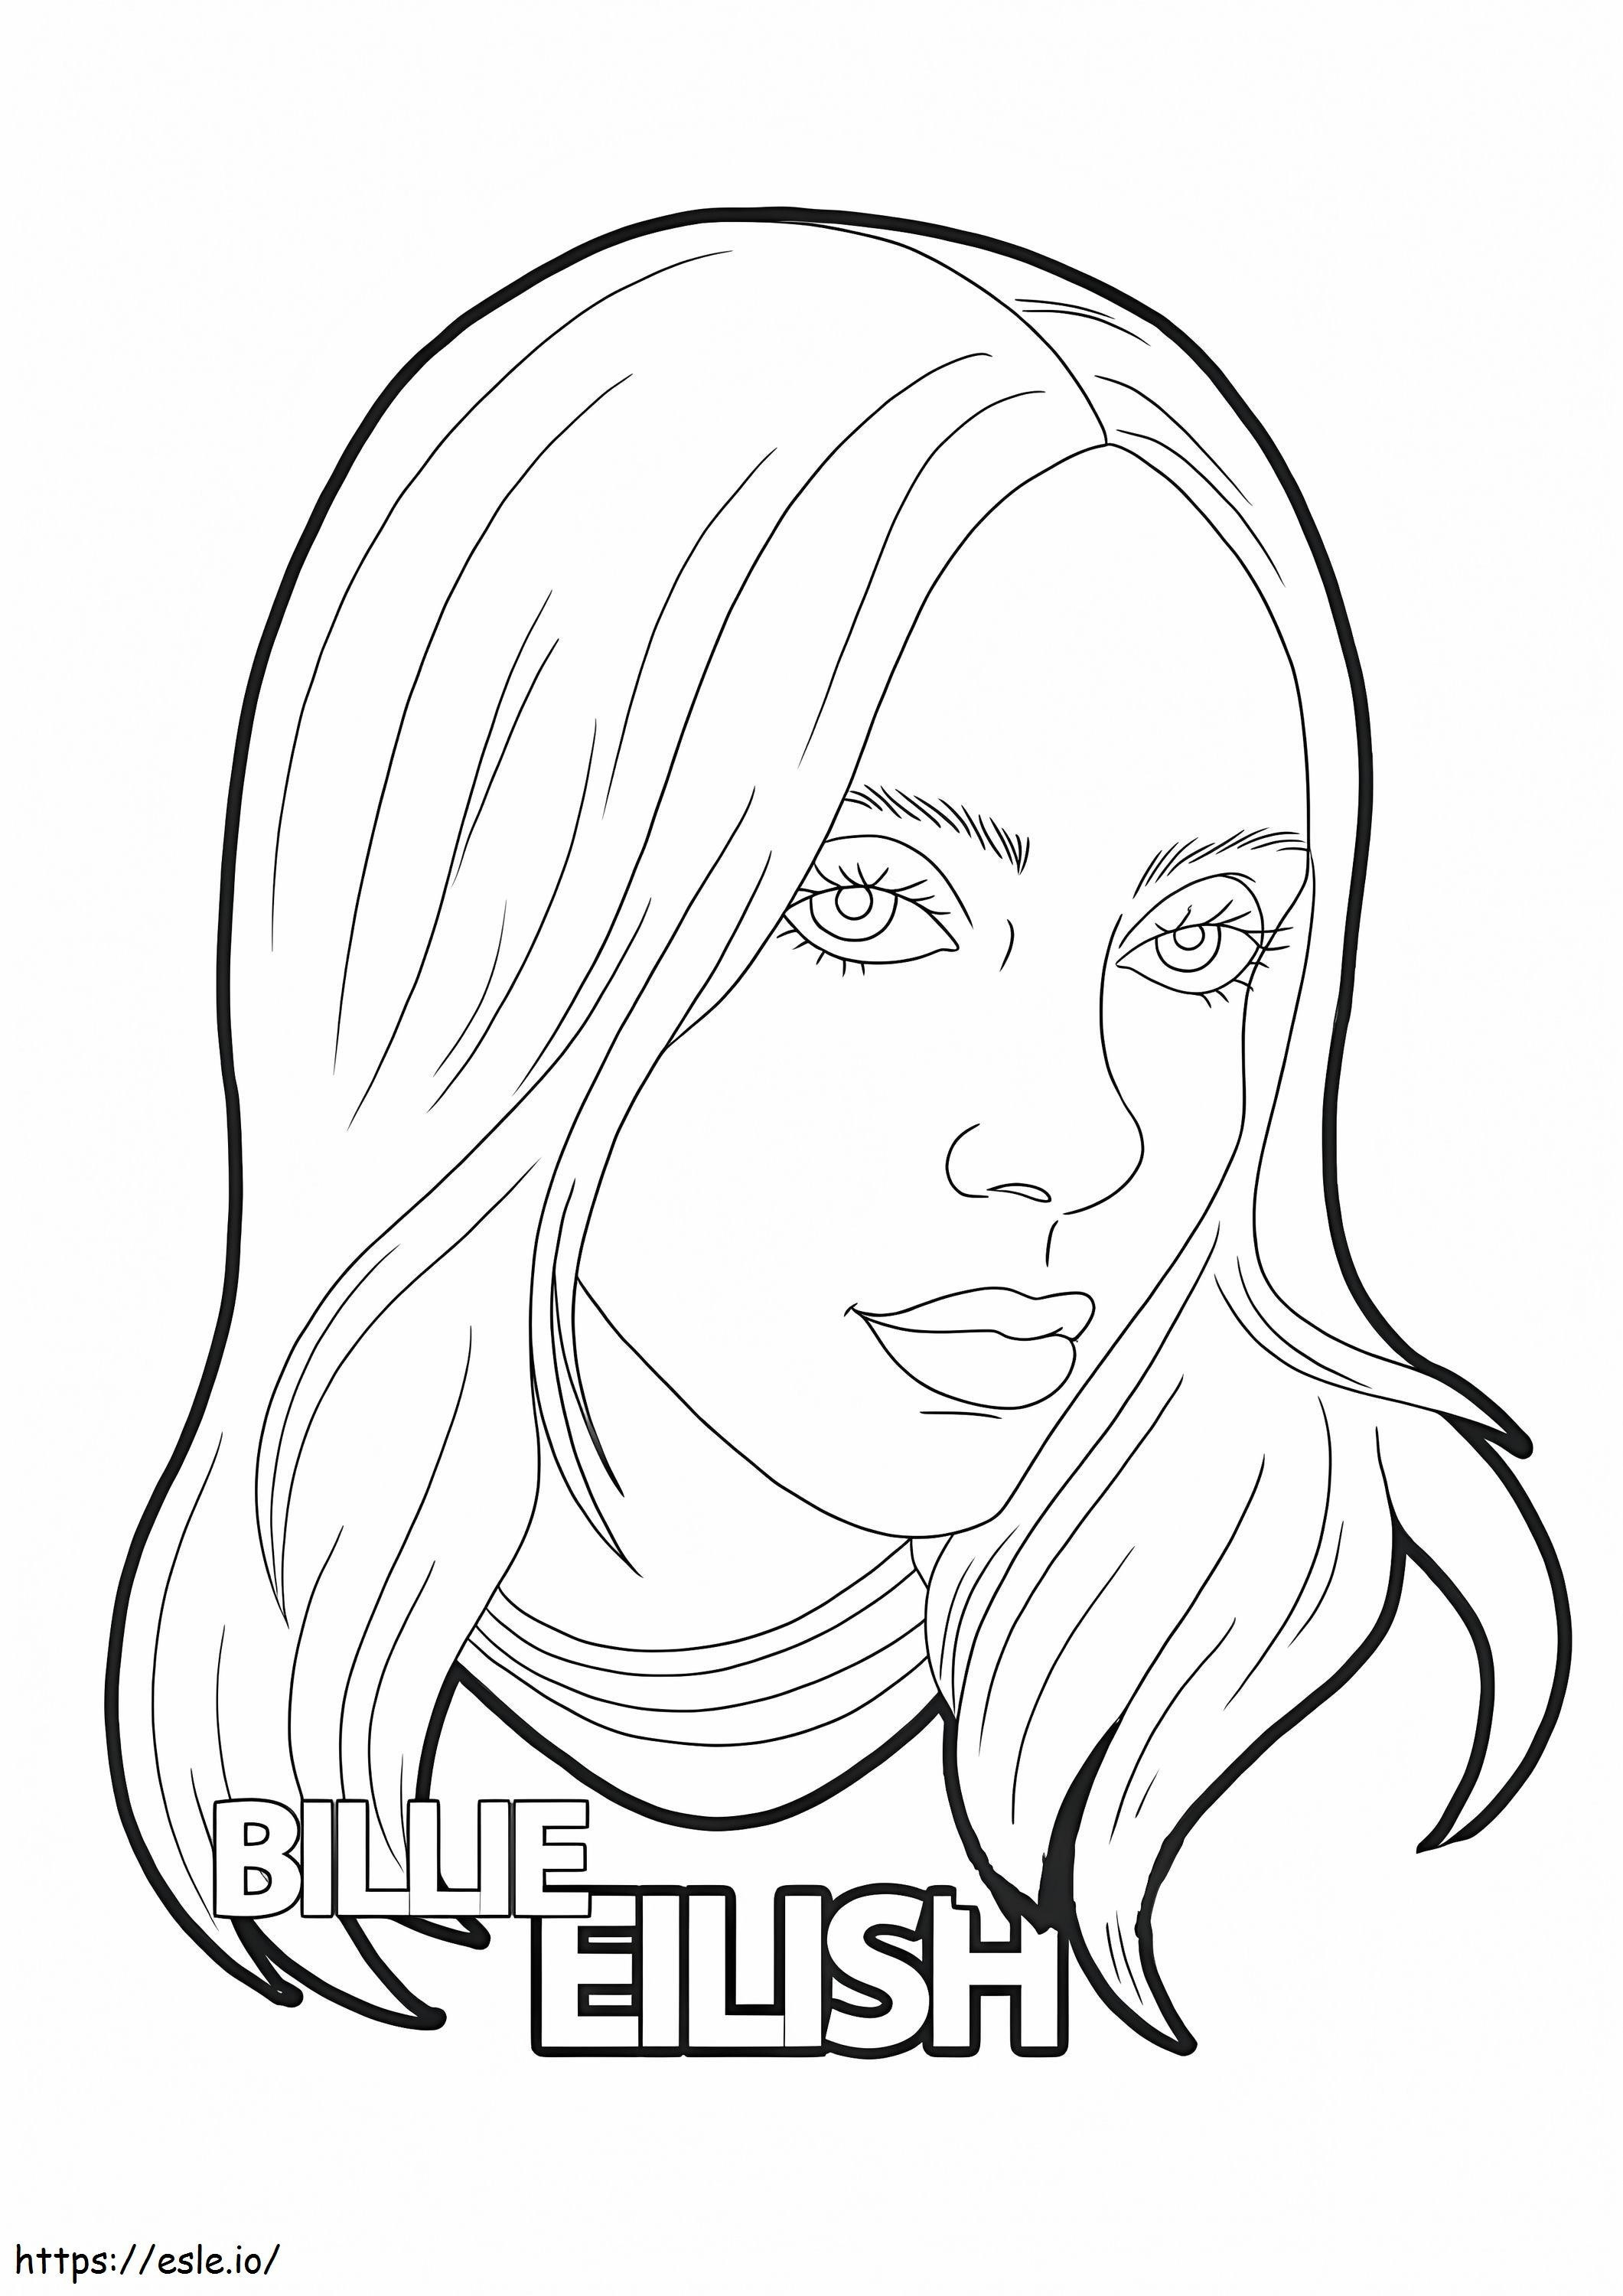 Awesome Billie Eilish coloring page